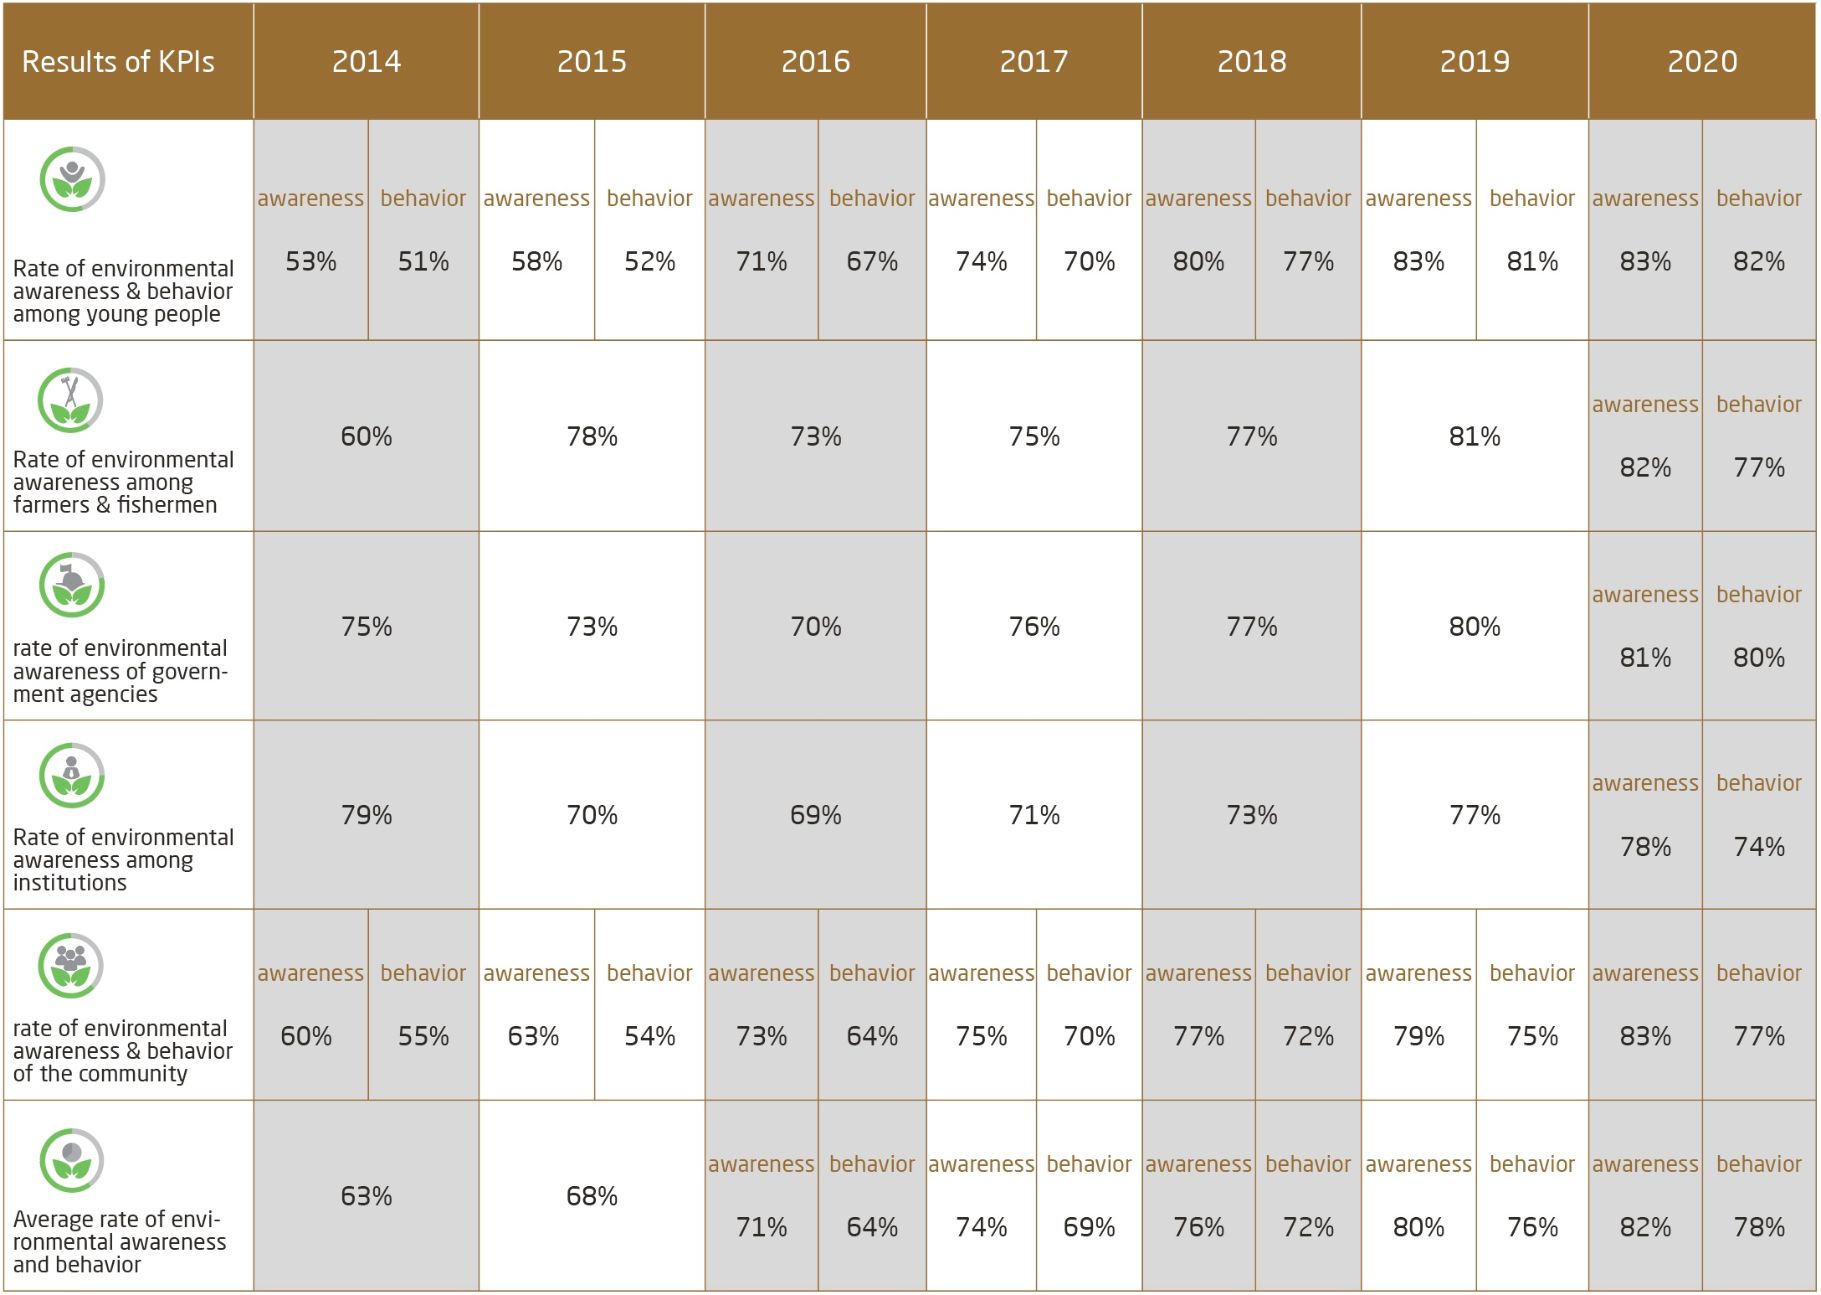 Outcomes of the annual environmental awareness and behavior survey in the UAE 2014-2019